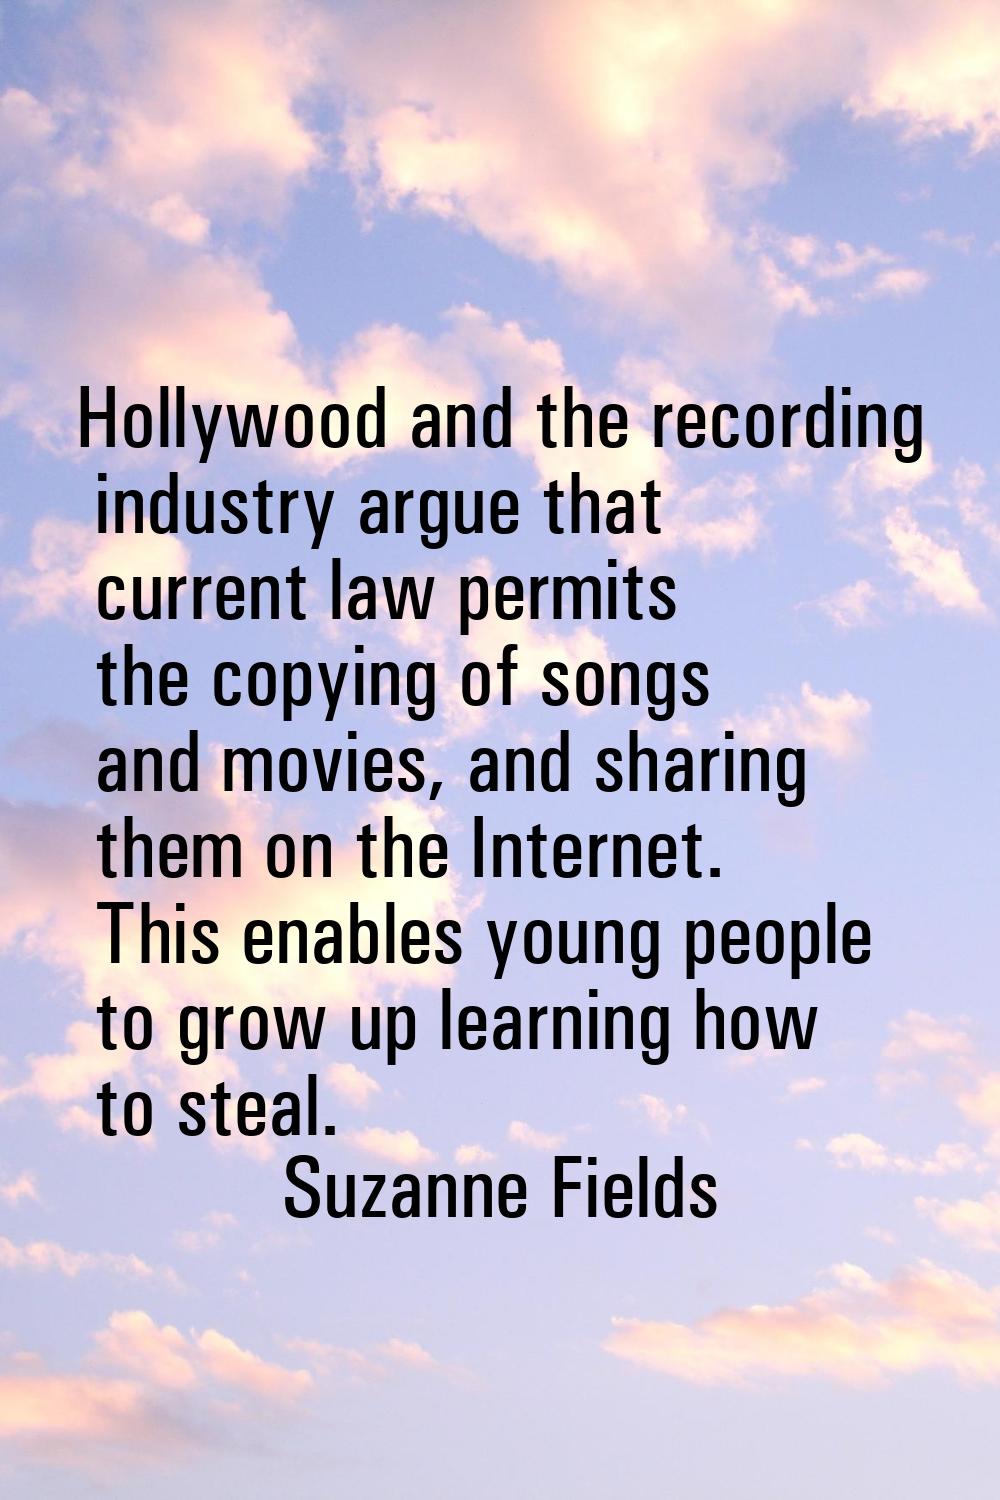 Hollywood and the recording industry argue that current law permits the copying of songs and movies